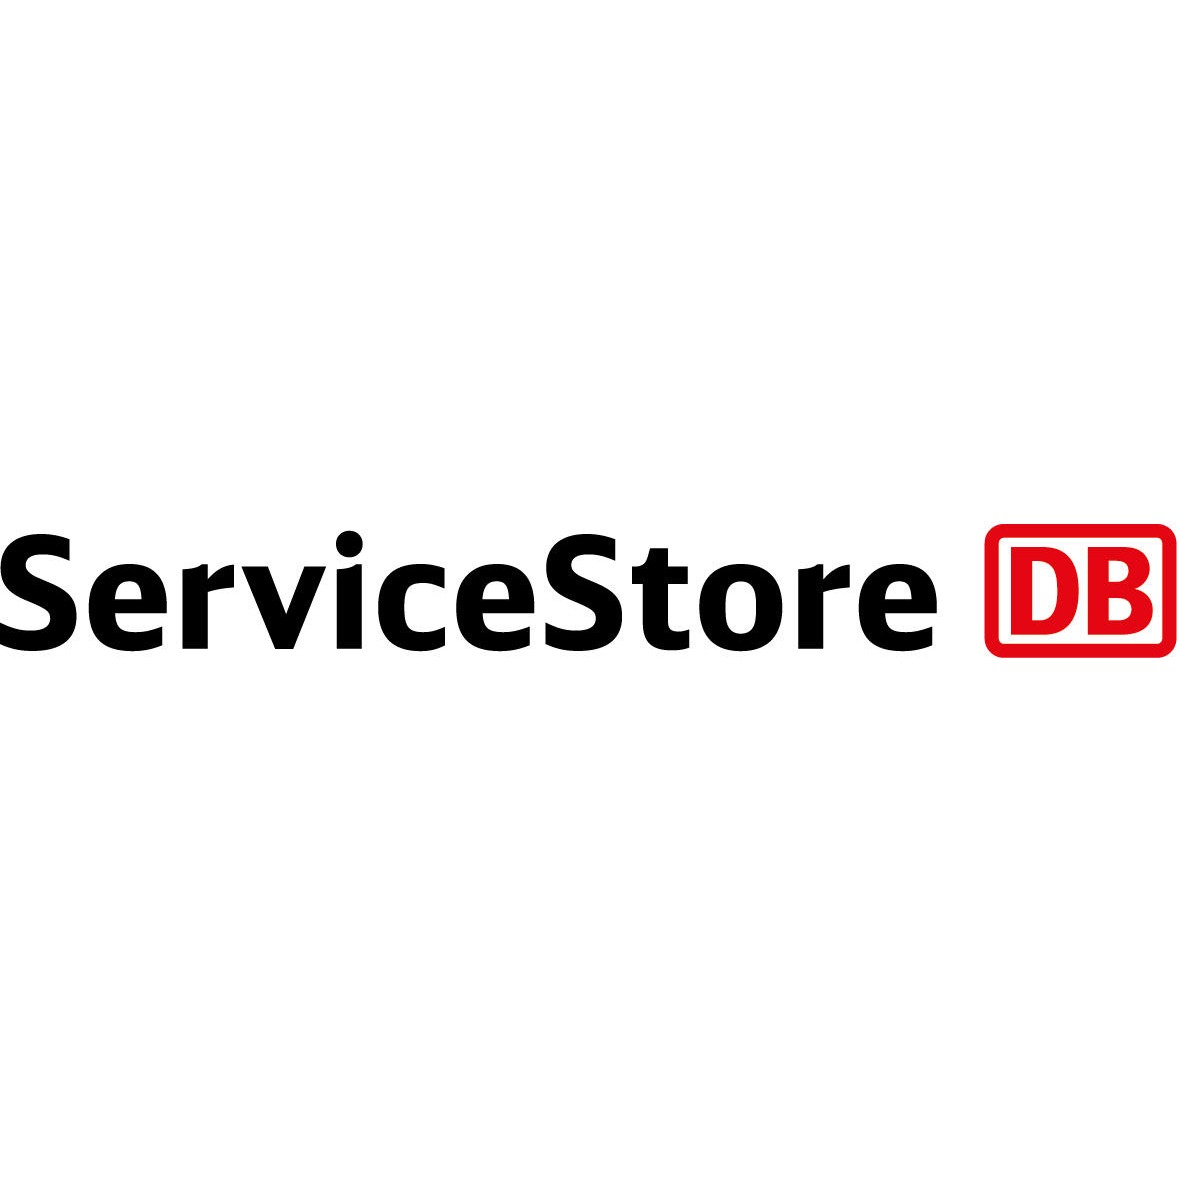 ServiceStore DB operated by UGDE